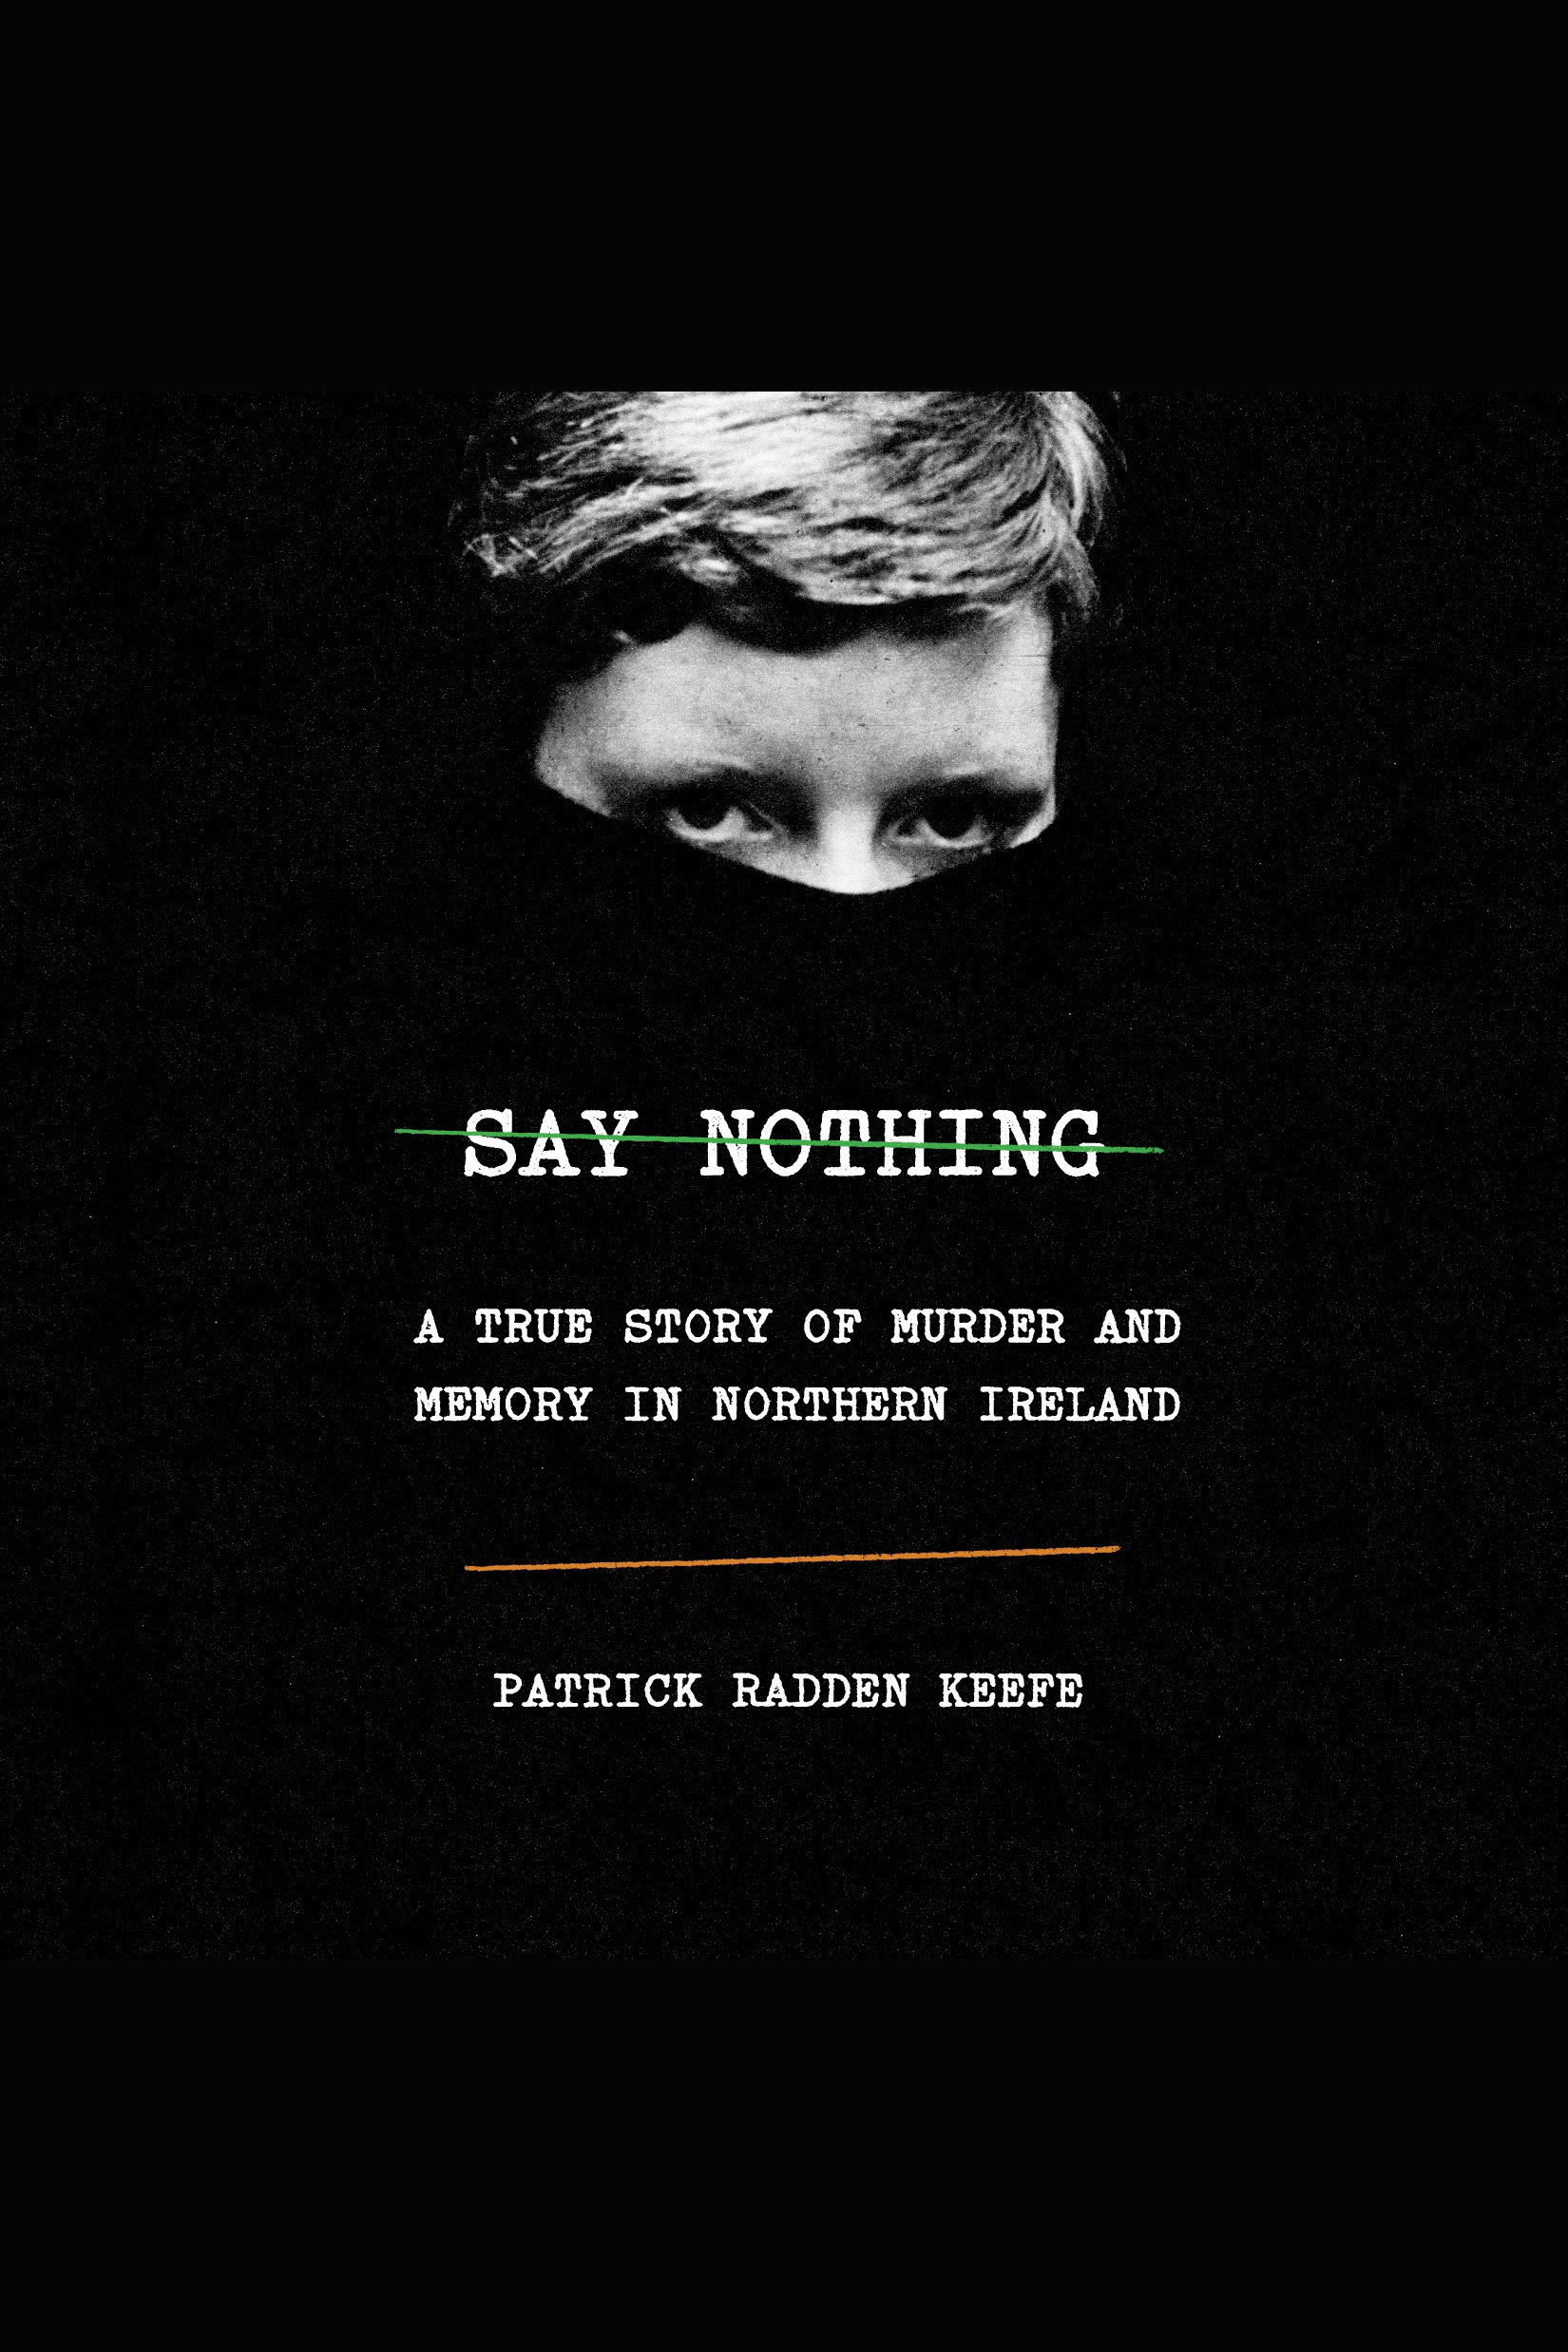 Say nothing a true story of murder and memory in Northern Ireland cover image